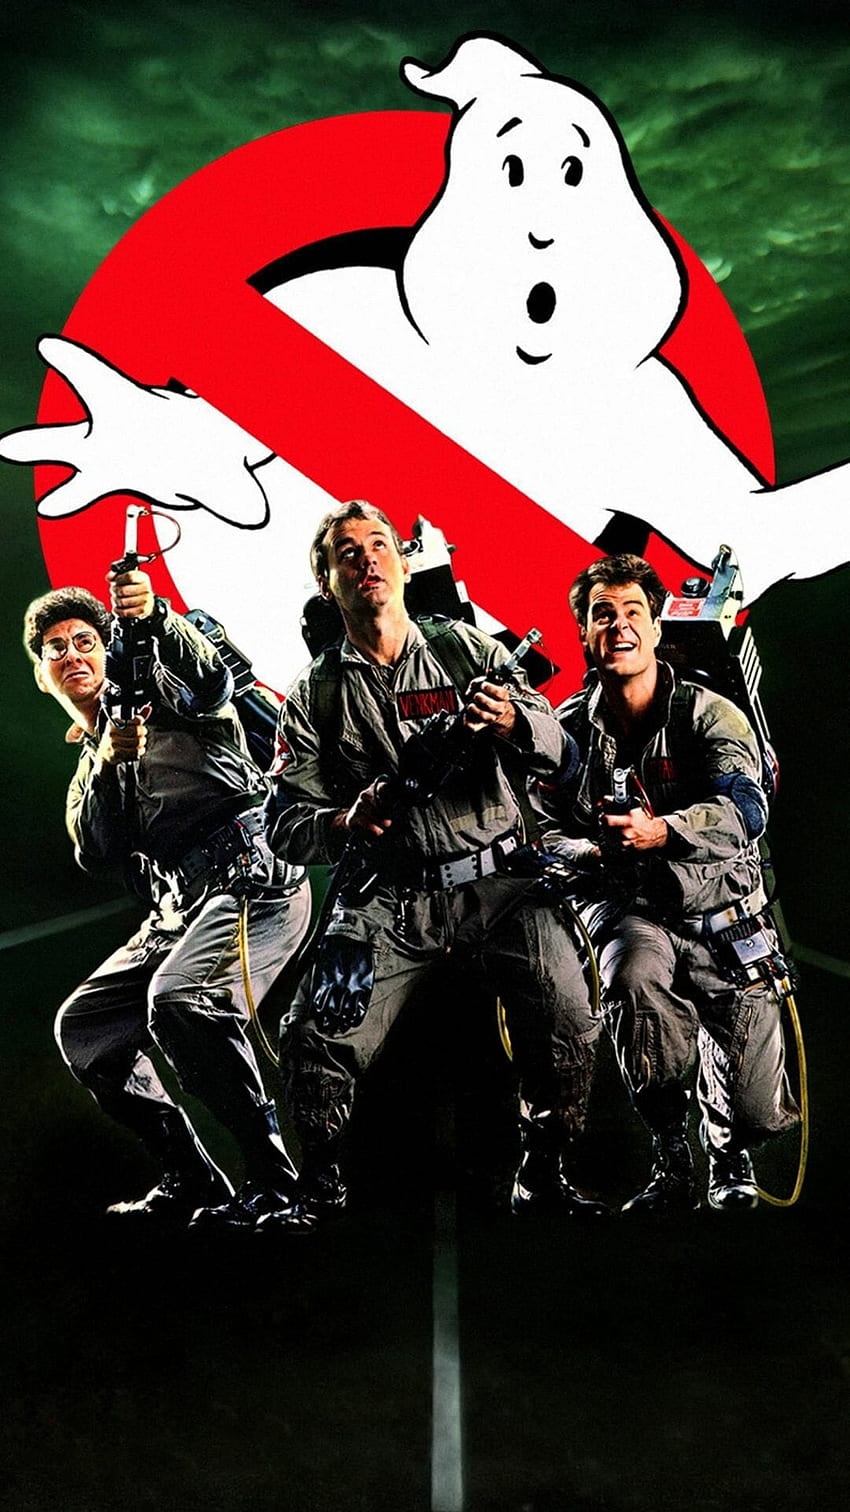 90 Ghostbusters (1984) 전화 . MOVIE POSTERS di 2019 - Android / iPhone Background (png / jpg) (2022), 고스트버스터즈 로고 HD 전화 배경 화면